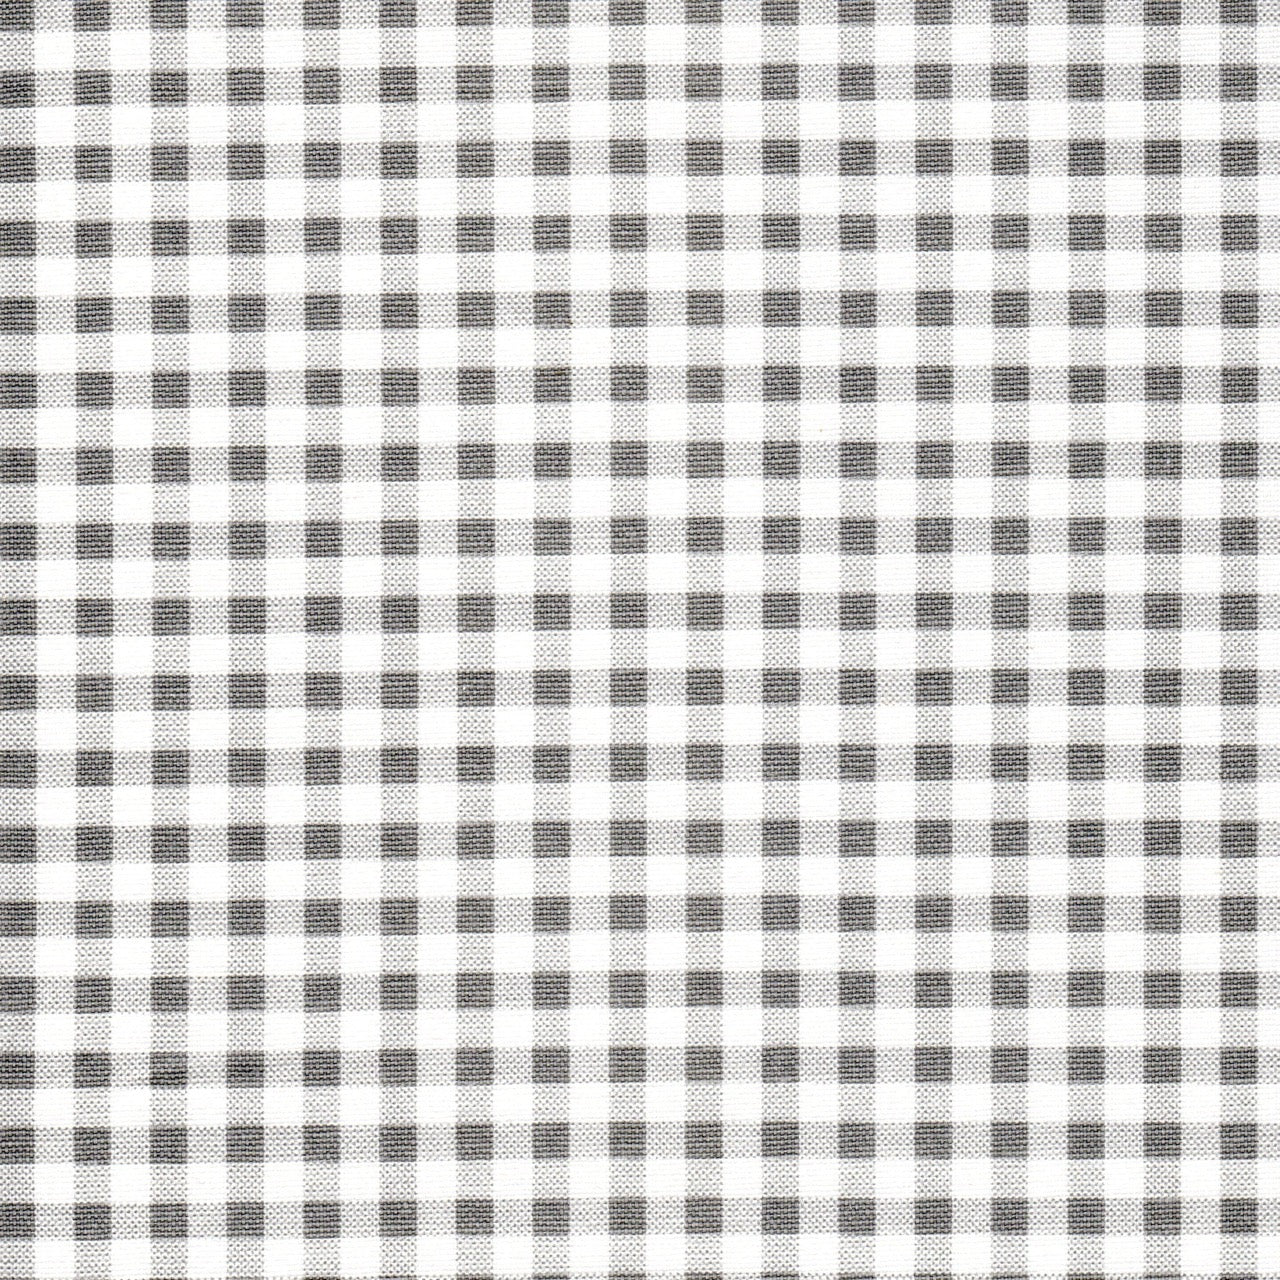 Gathered Bedskirt in Storm Gray Large Gingham Check on White